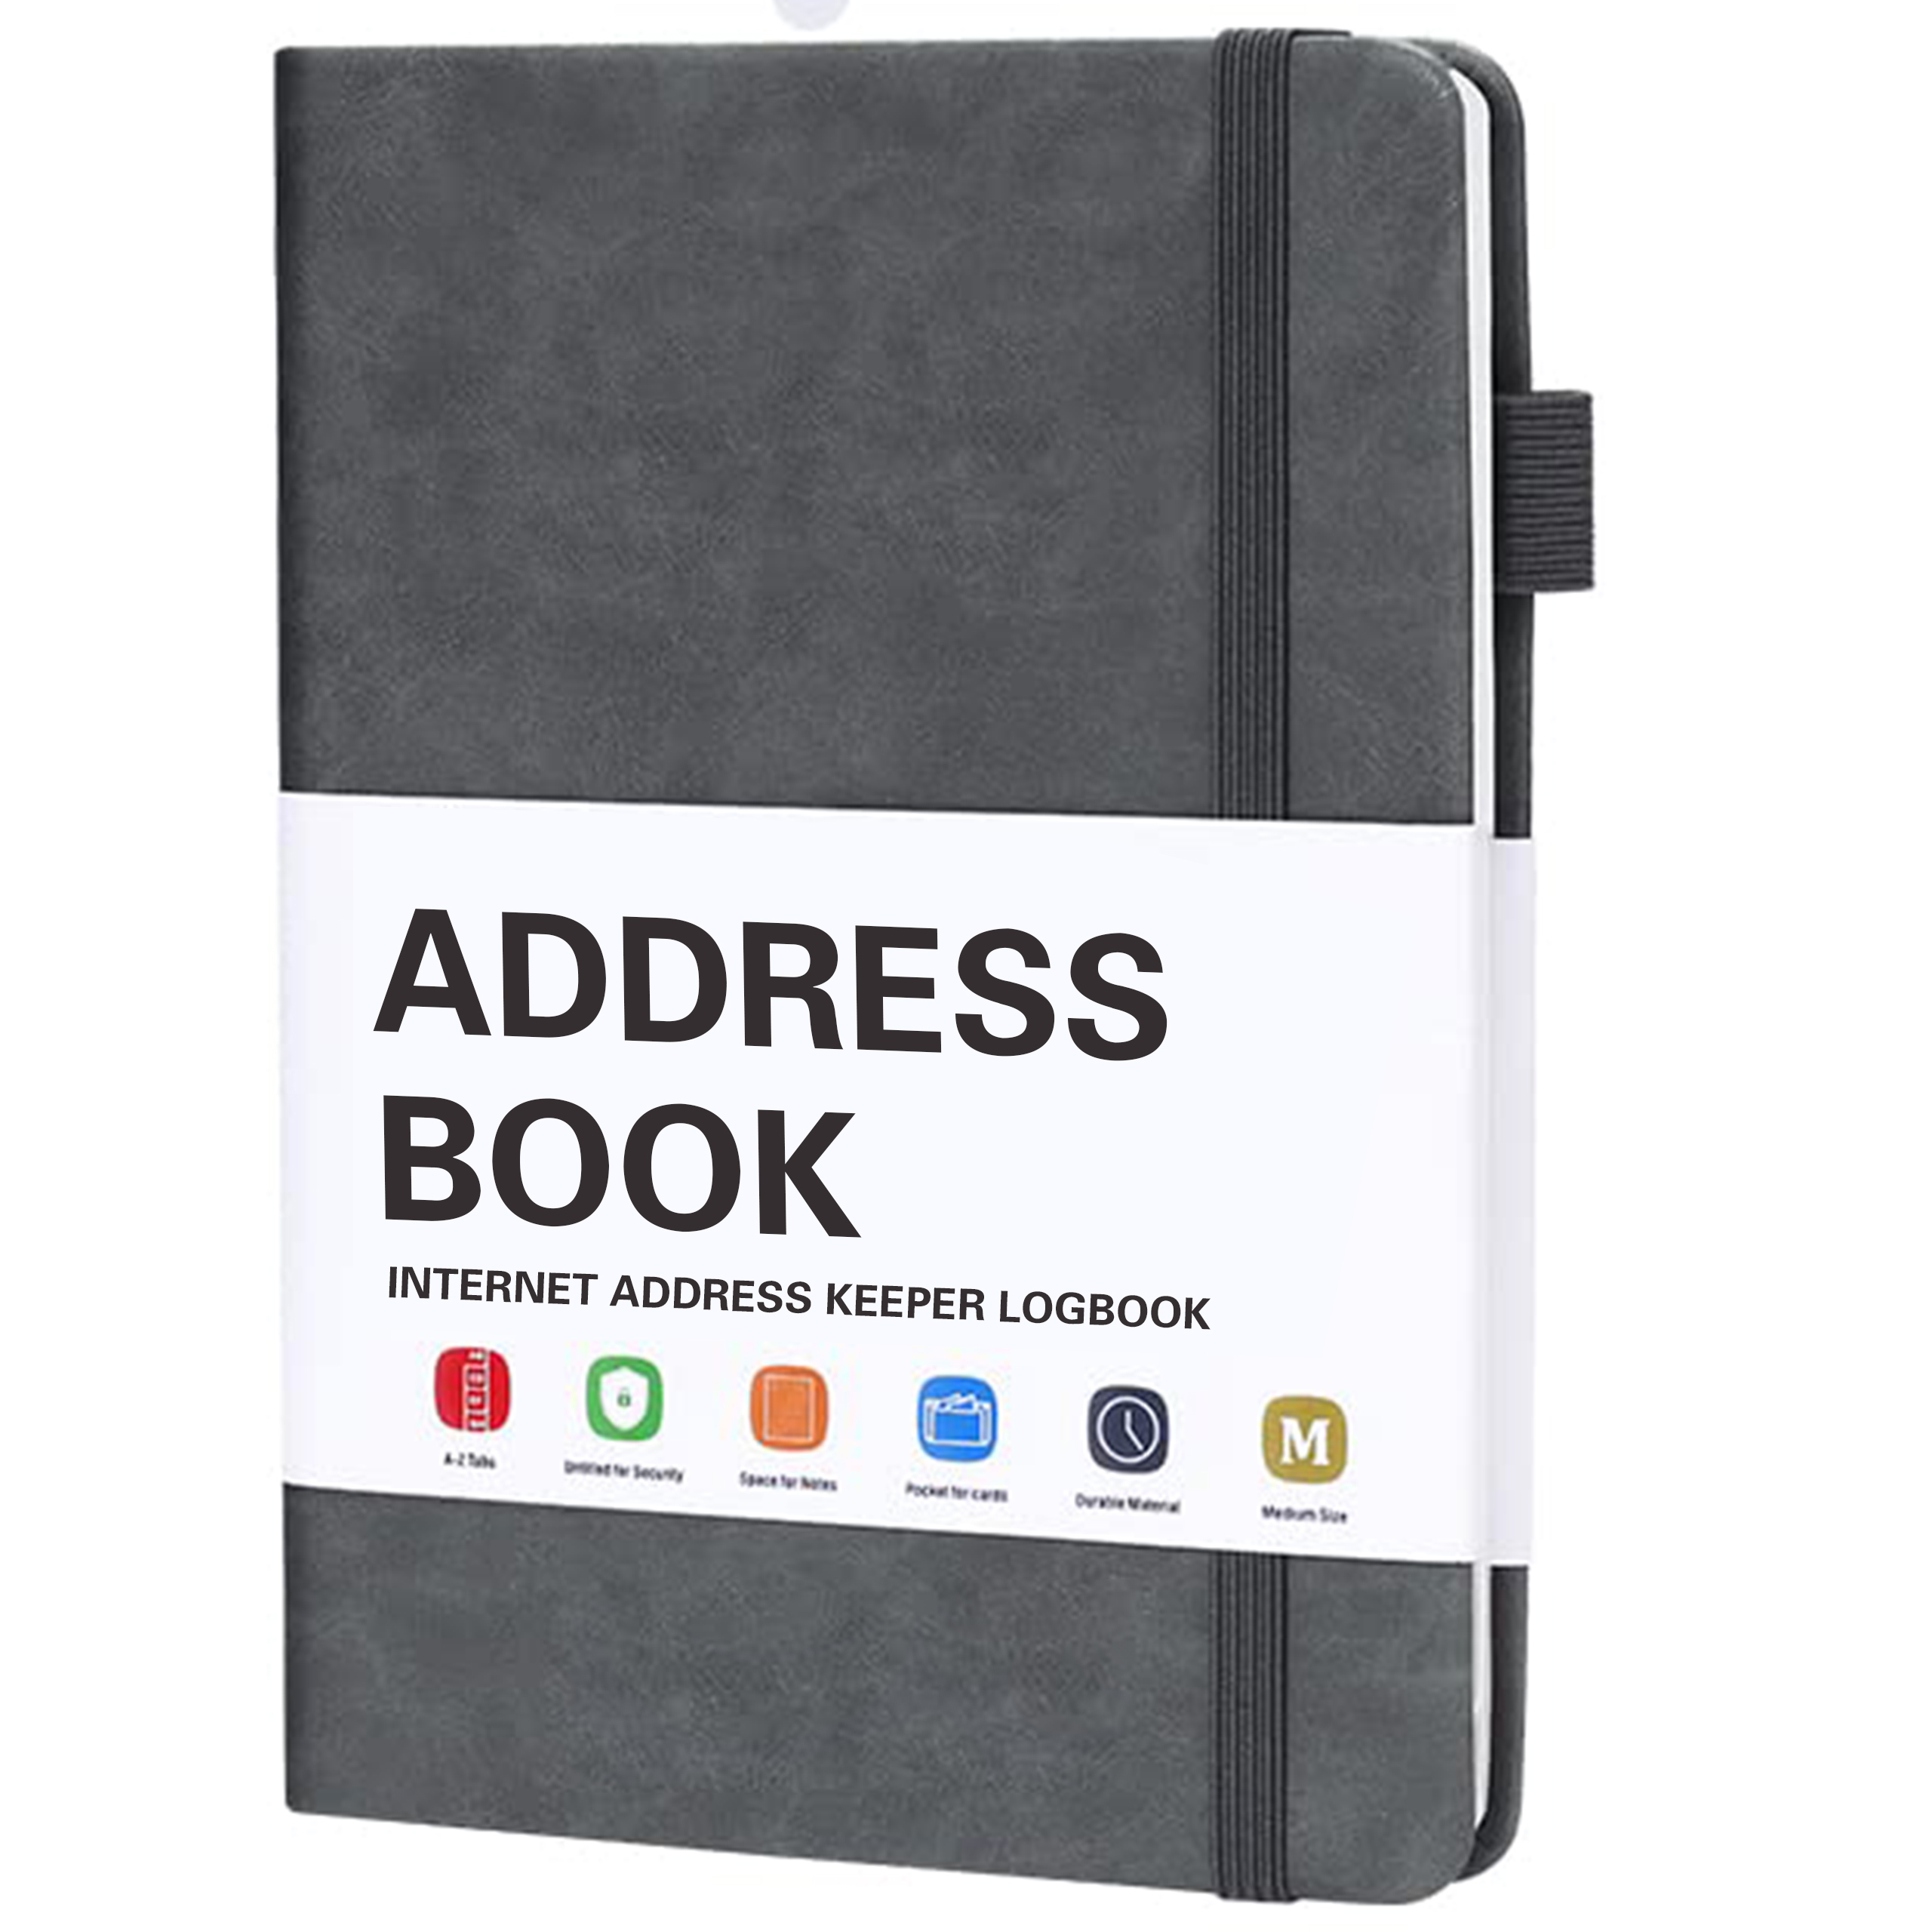 Where to personalised your own hardcover password notebook and contact list?